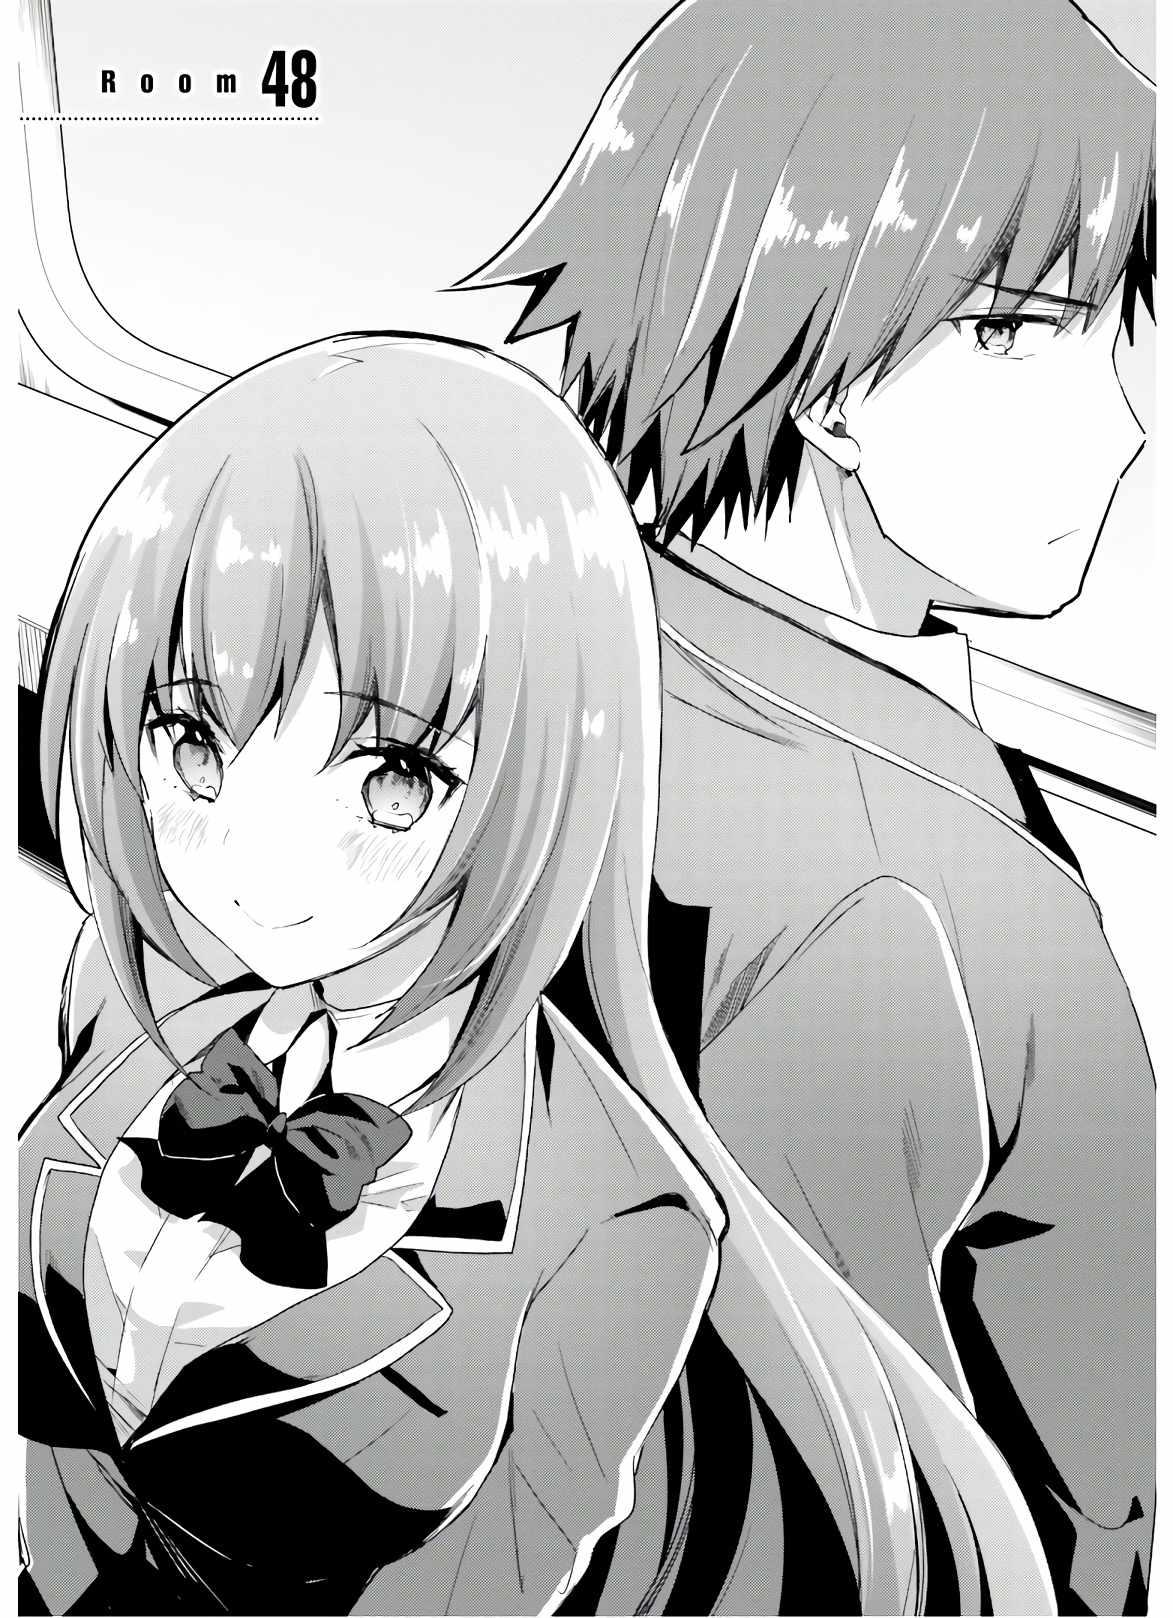 Welcome To The Classroom Of The Supreme Ability Doctrine: Other School Days  Manga Online Free - Manganelo